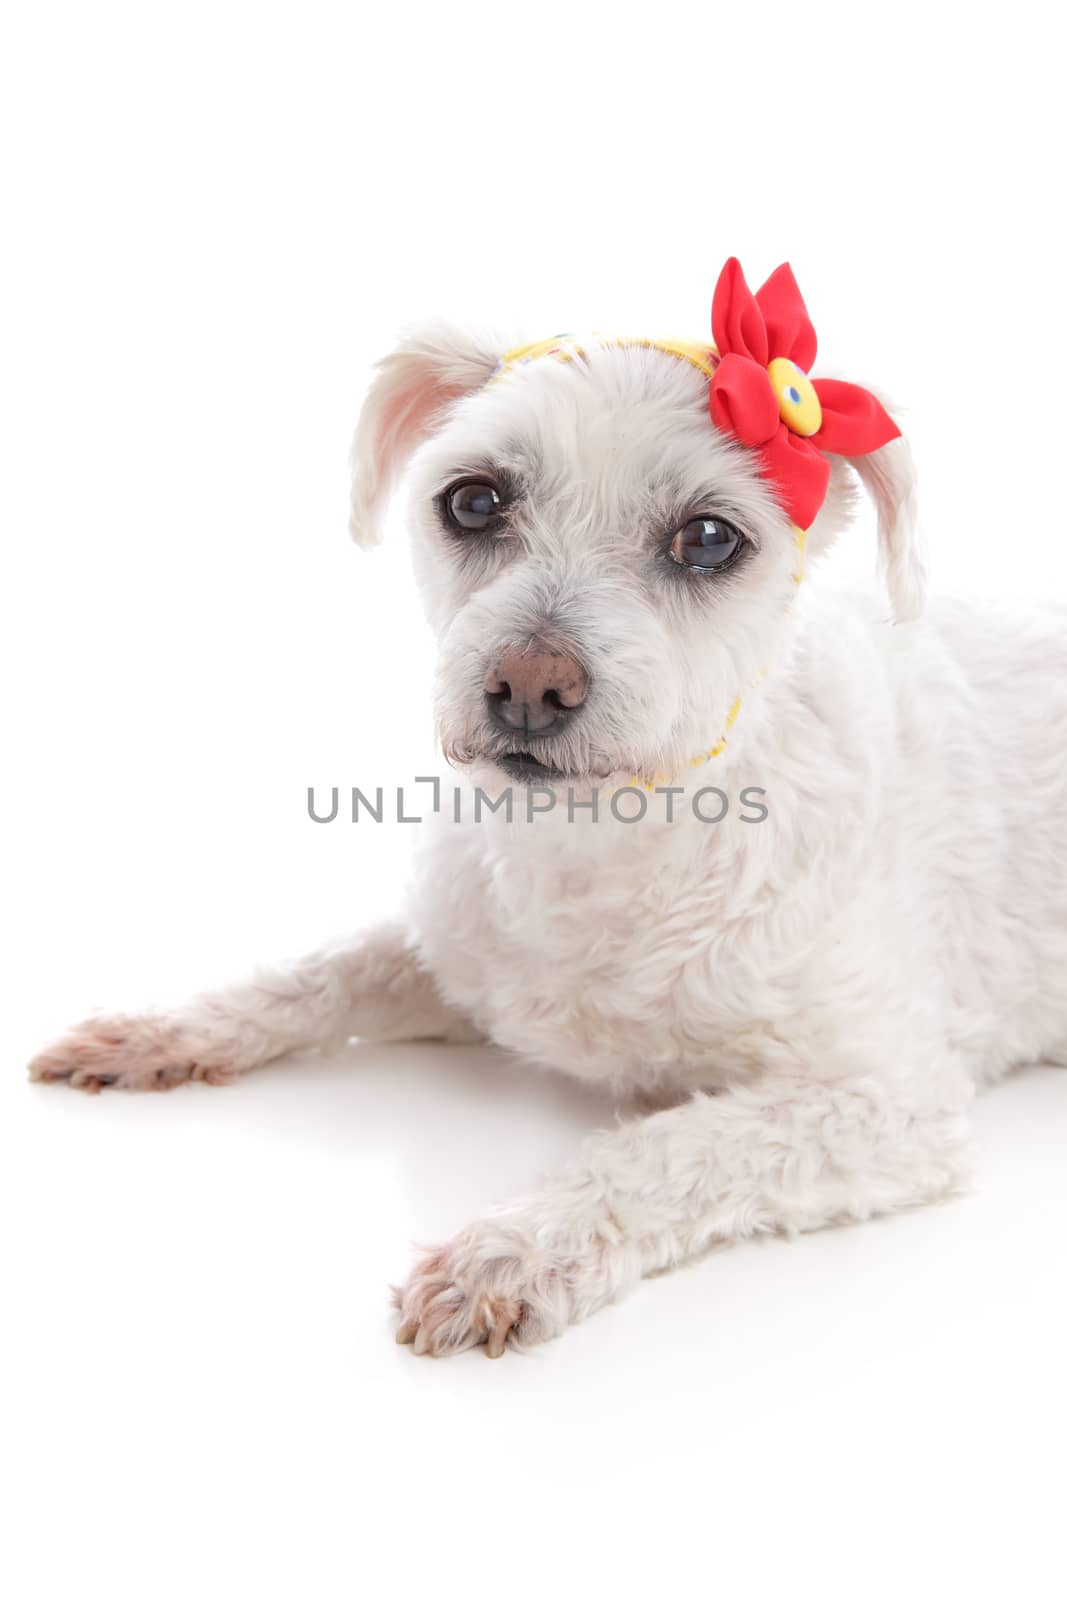 Small little white maltese terrier lying down.  Wearing a yellow bandana scarf with a decorative red and yellow flower.  White background